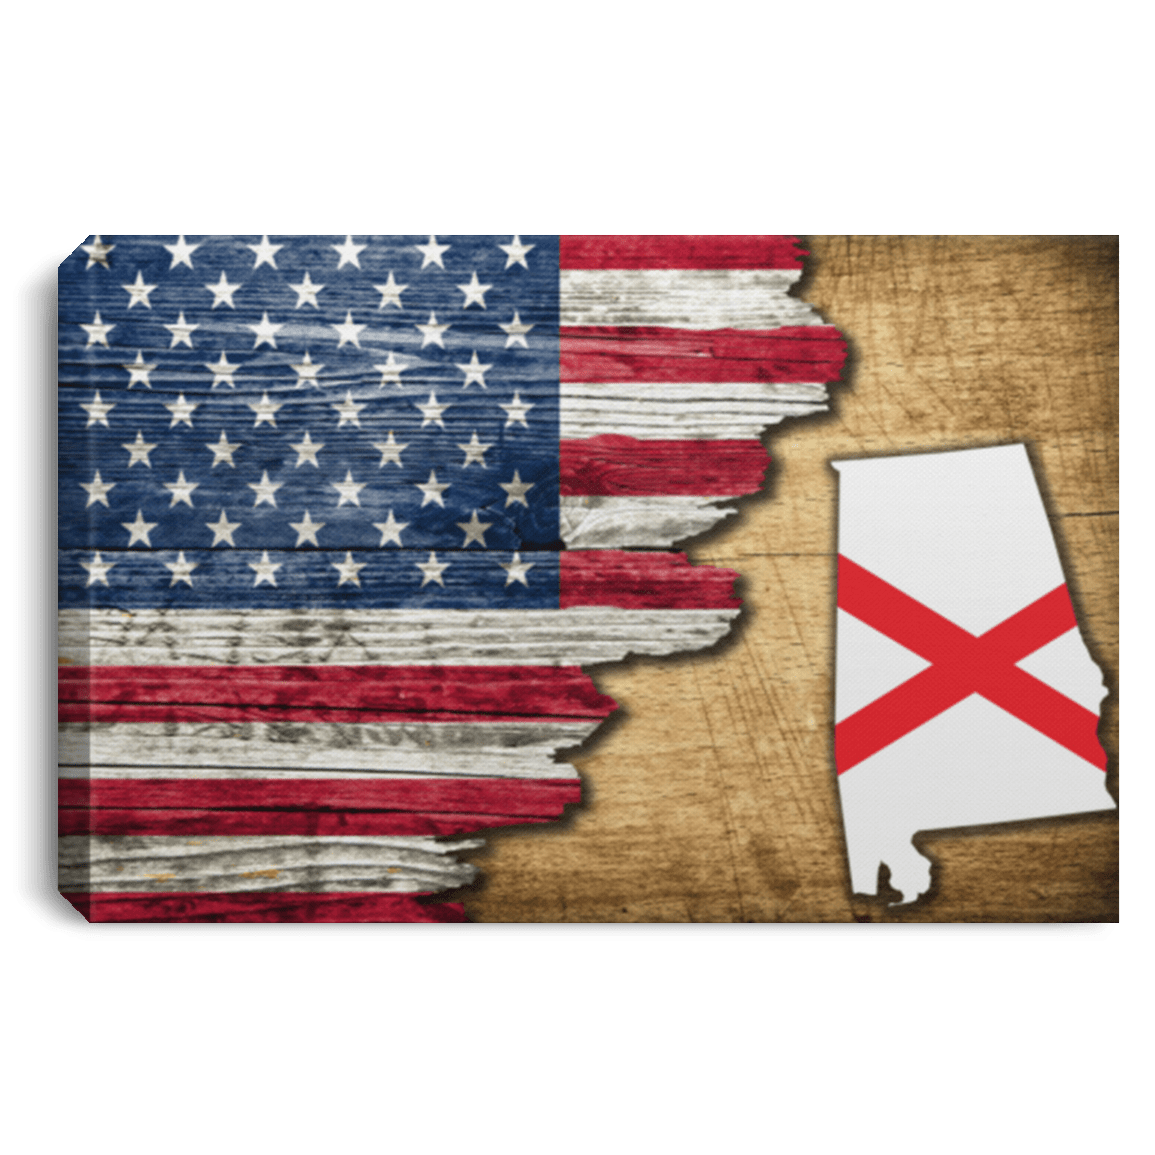 United States/Alabama Flag Ripped Effect 18X12 Inches Landscape Canvas .75In Frame